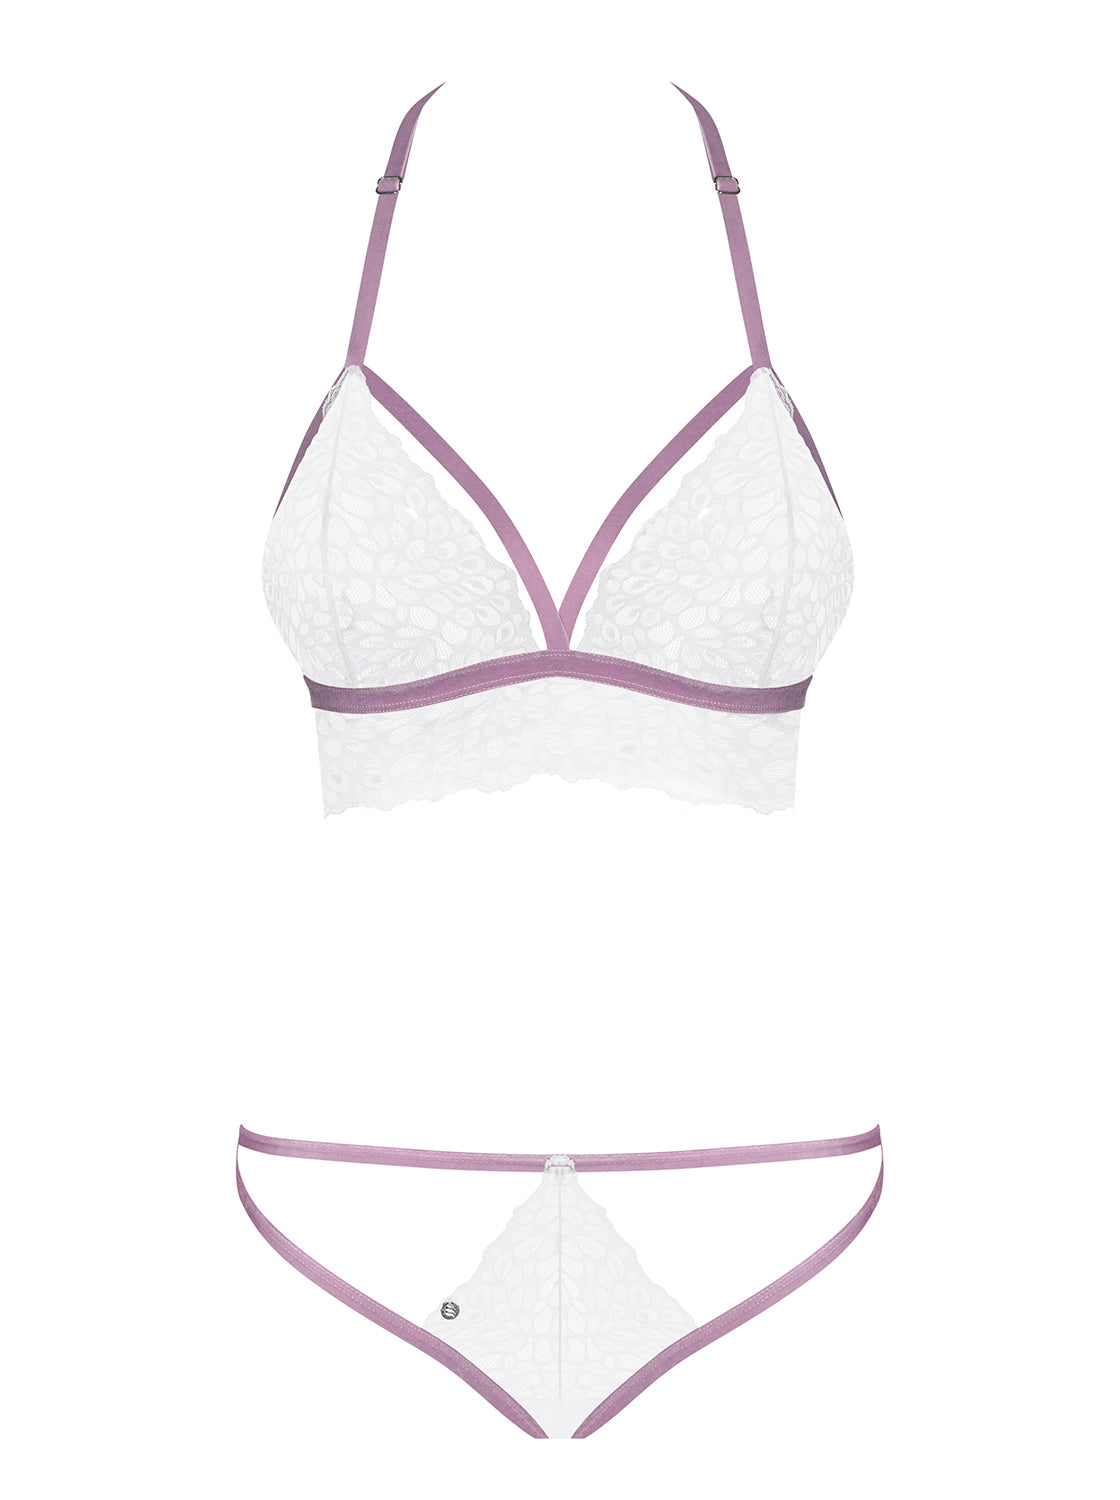 Lilyanne, feminine lingerie set made of transparent and floral lace in white with lilac, soft velvet straps